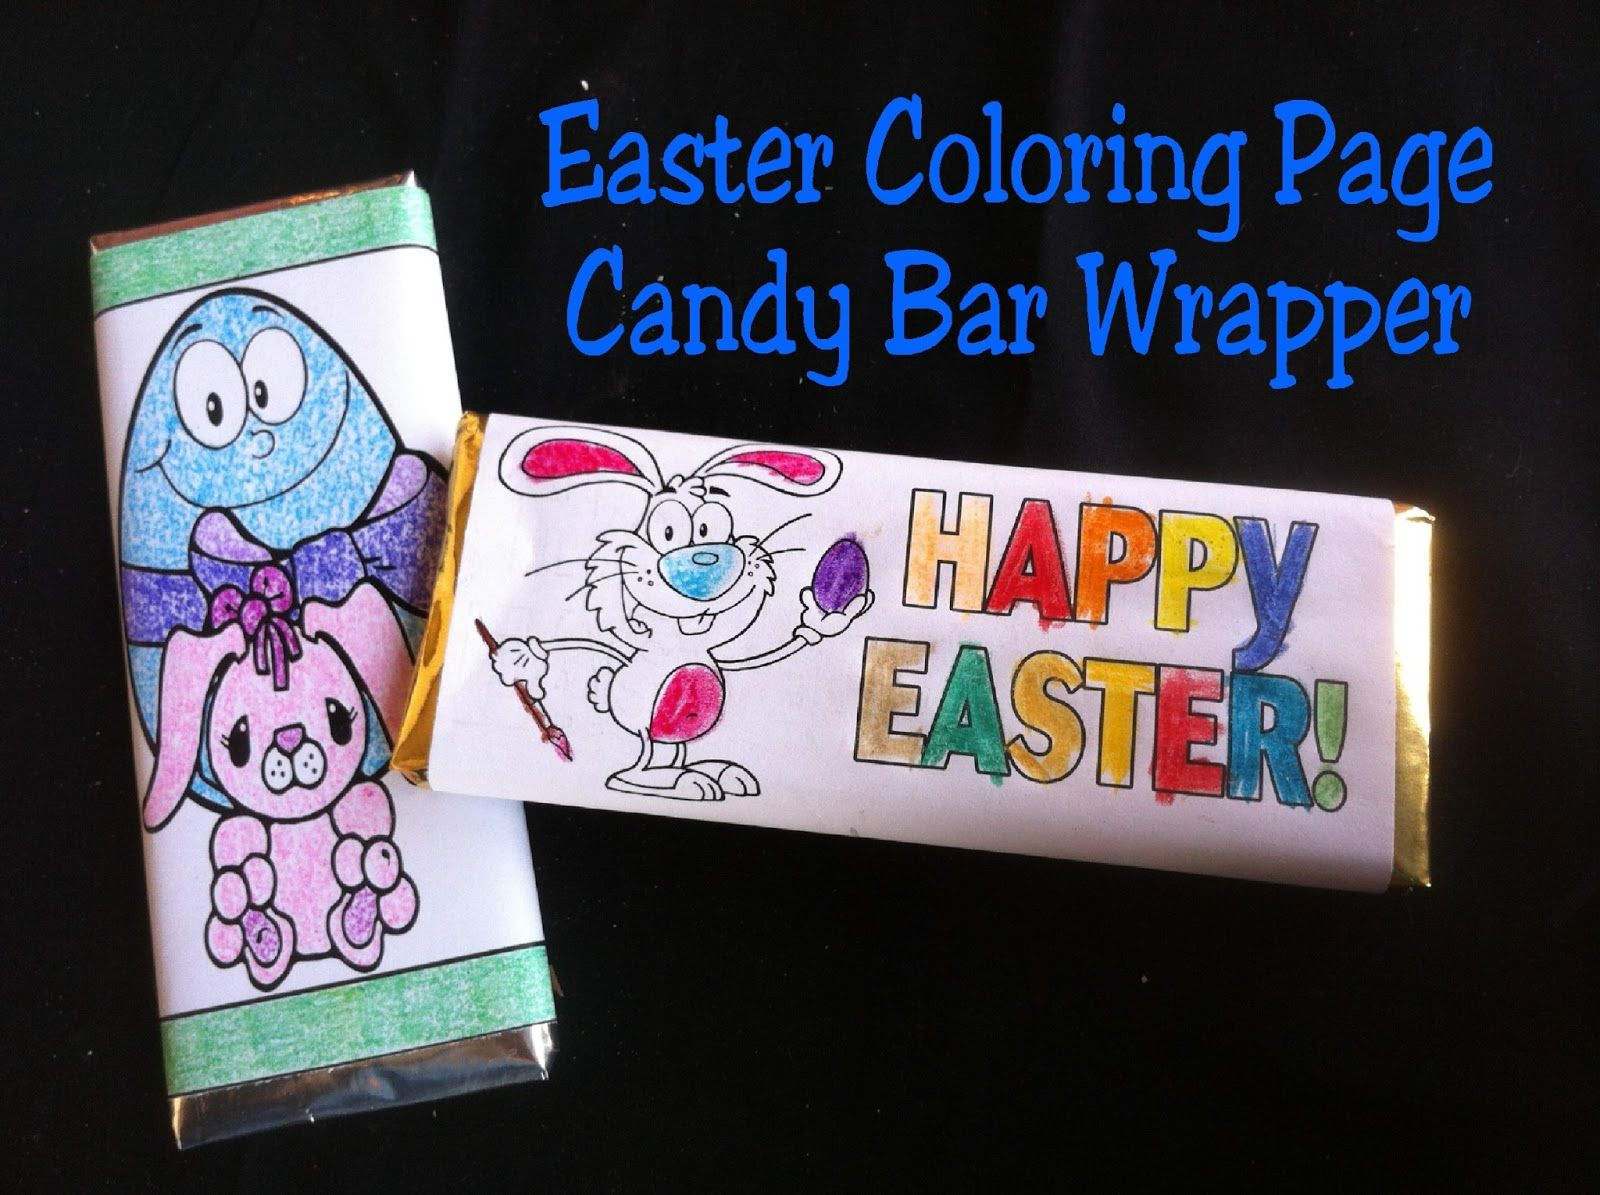 Easter Coloring Page Candy Bar Wrapper Free Printable | Free - Free Printable Birthday Candy Bar Wrappers